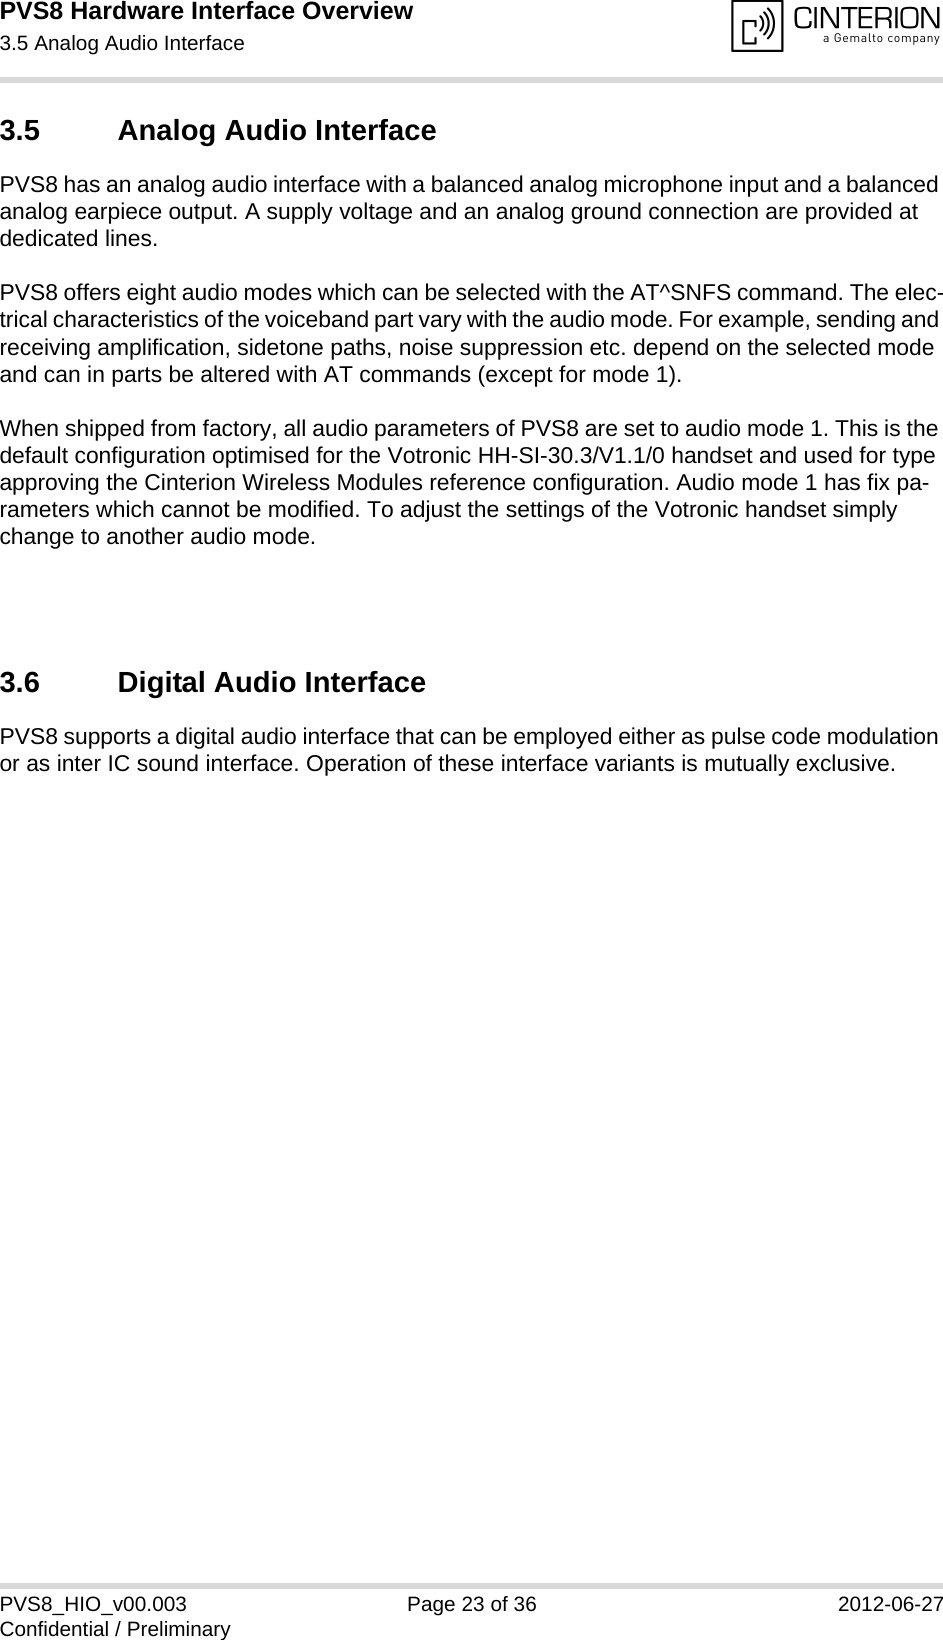 PVS8 Hardware Interface Overview3.5 Analog Audio Interface24PVS8_HIO_v00.003 Page 23 of 36 2012-06-27Confidential / Preliminary3.5 Analog Audio InterfacePVS8 has an analog audio interface with a balanced analog microphone input and a balanced analog earpiece output. A supply voltage and an analog ground connection are provided at dedicated lines.PVS8 offers eight audio modes which can be selected with the AT^SNFS command. The elec-trical characteristics of the voiceband part vary with the audio mode. For example, sending and receiving amplification, sidetone paths, noise suppression etc. depend on the selected mode and can in parts be altered with AT commands (except for mode 1).When shipped from factory, all audio parameters of PVS8 are set to audio mode 1. This is the default configuration optimised for the Votronic HH-SI-30.3/V1.1/0 handset and used for type approving the Cinterion Wireless Modules reference configuration. Audio mode 1 has fix pa-rameters which cannot be modified. To adjust the settings of the Votronic handset simply change to another audio mode.3.6 Digital Audio InterfacePVS8 supports a digital audio interface that can be employed either as pulse code modulation or as inter IC sound interface. Operation of these interface variants is mutually exclusive.